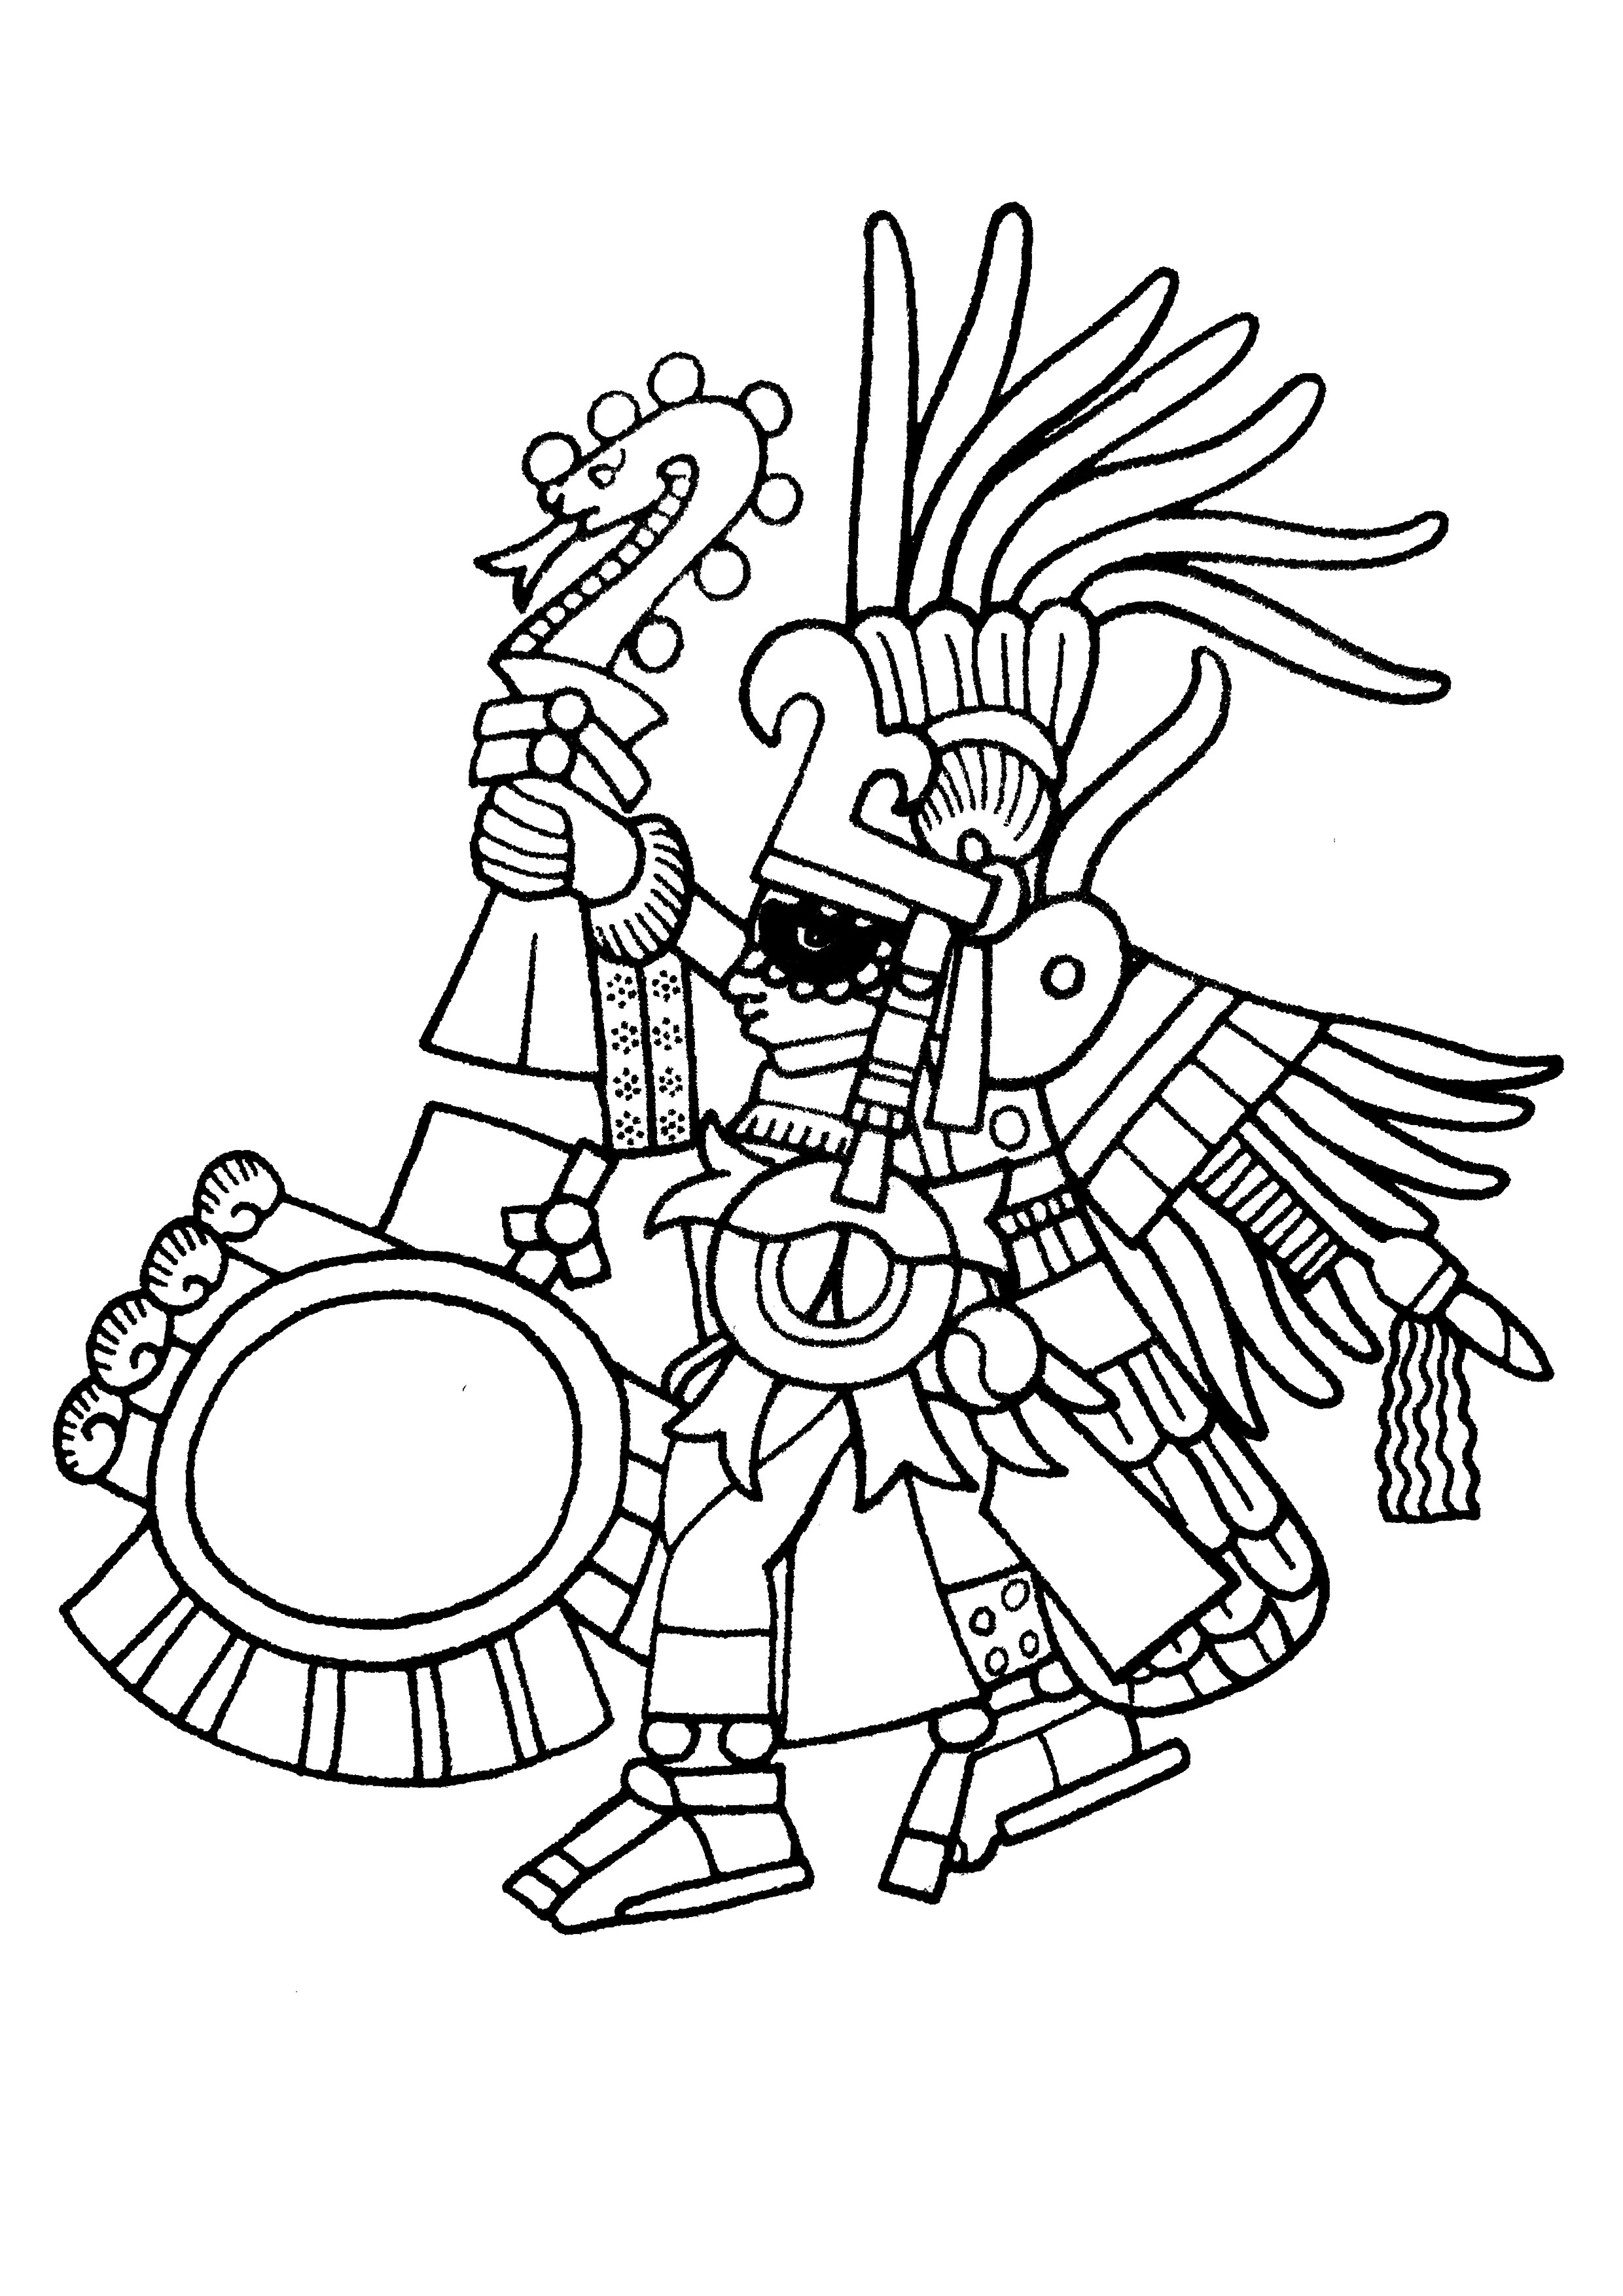 Aztec Coloring Pages Pdf to Print - Printable Aztec Coloring Pages